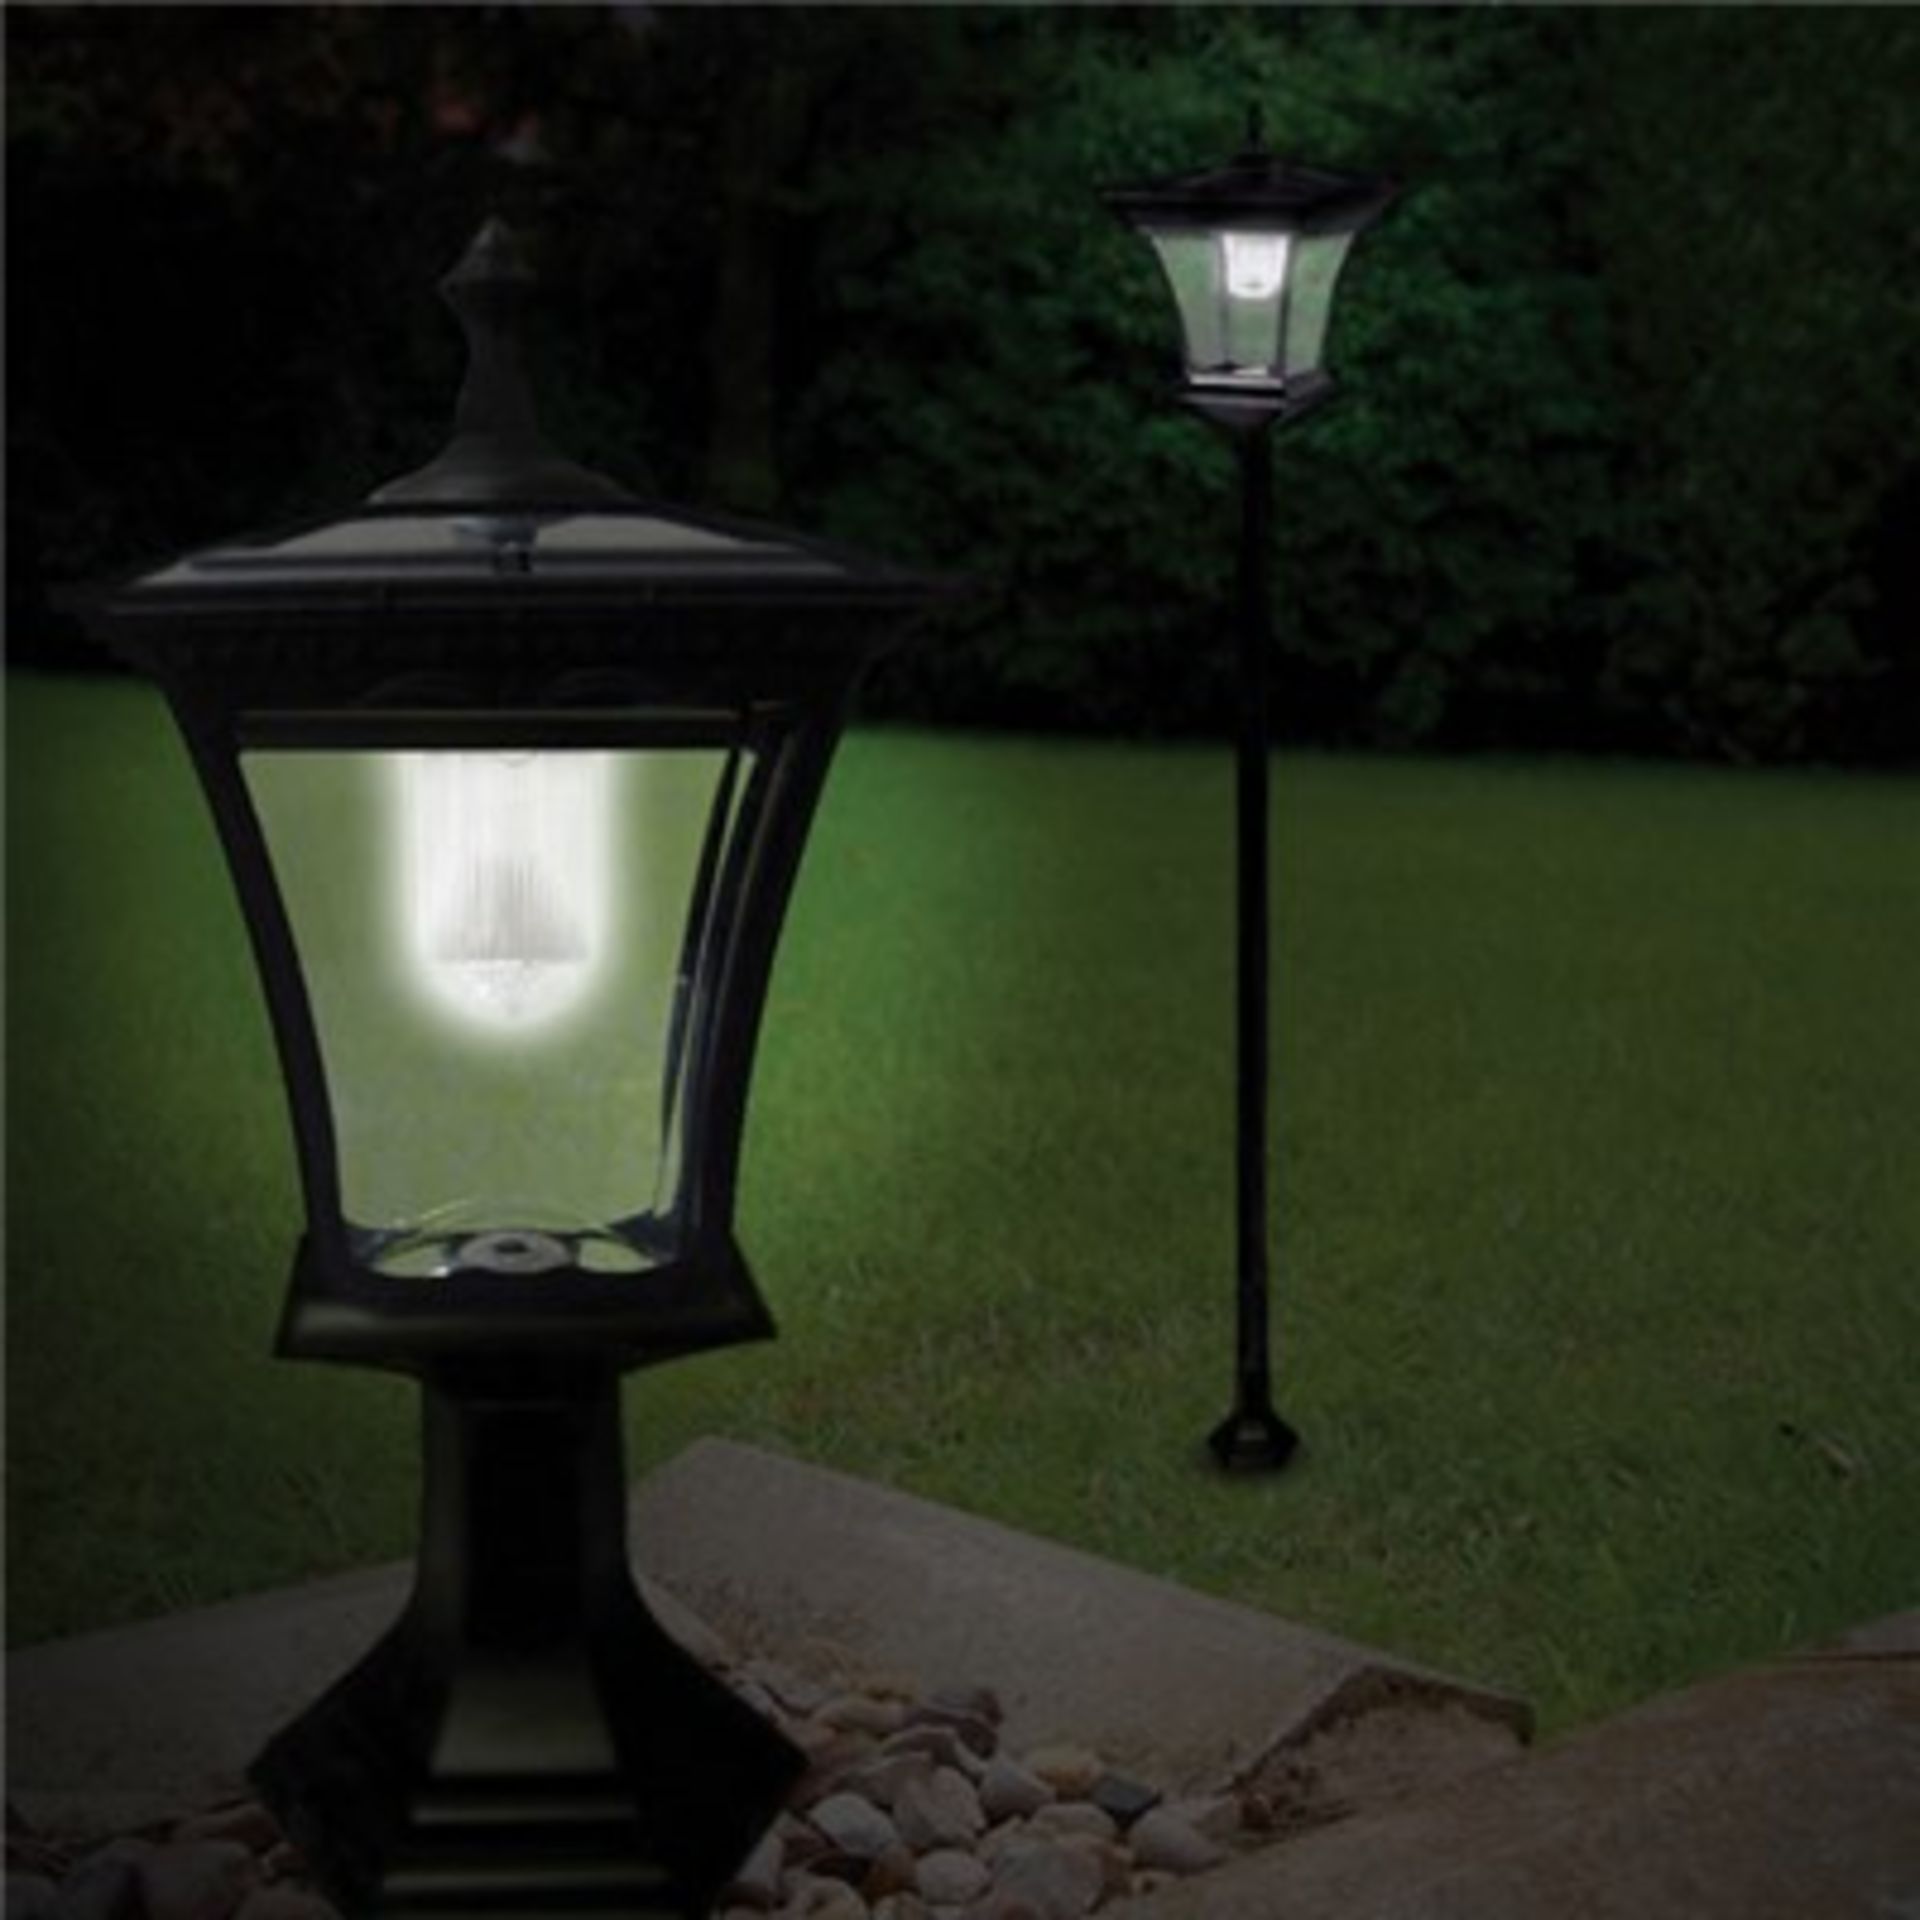 V Brand New Solar Powered Lamp Post and Wall Light Kit Makes Two Lamp Posts/Wall Lights SRP £39.99 X